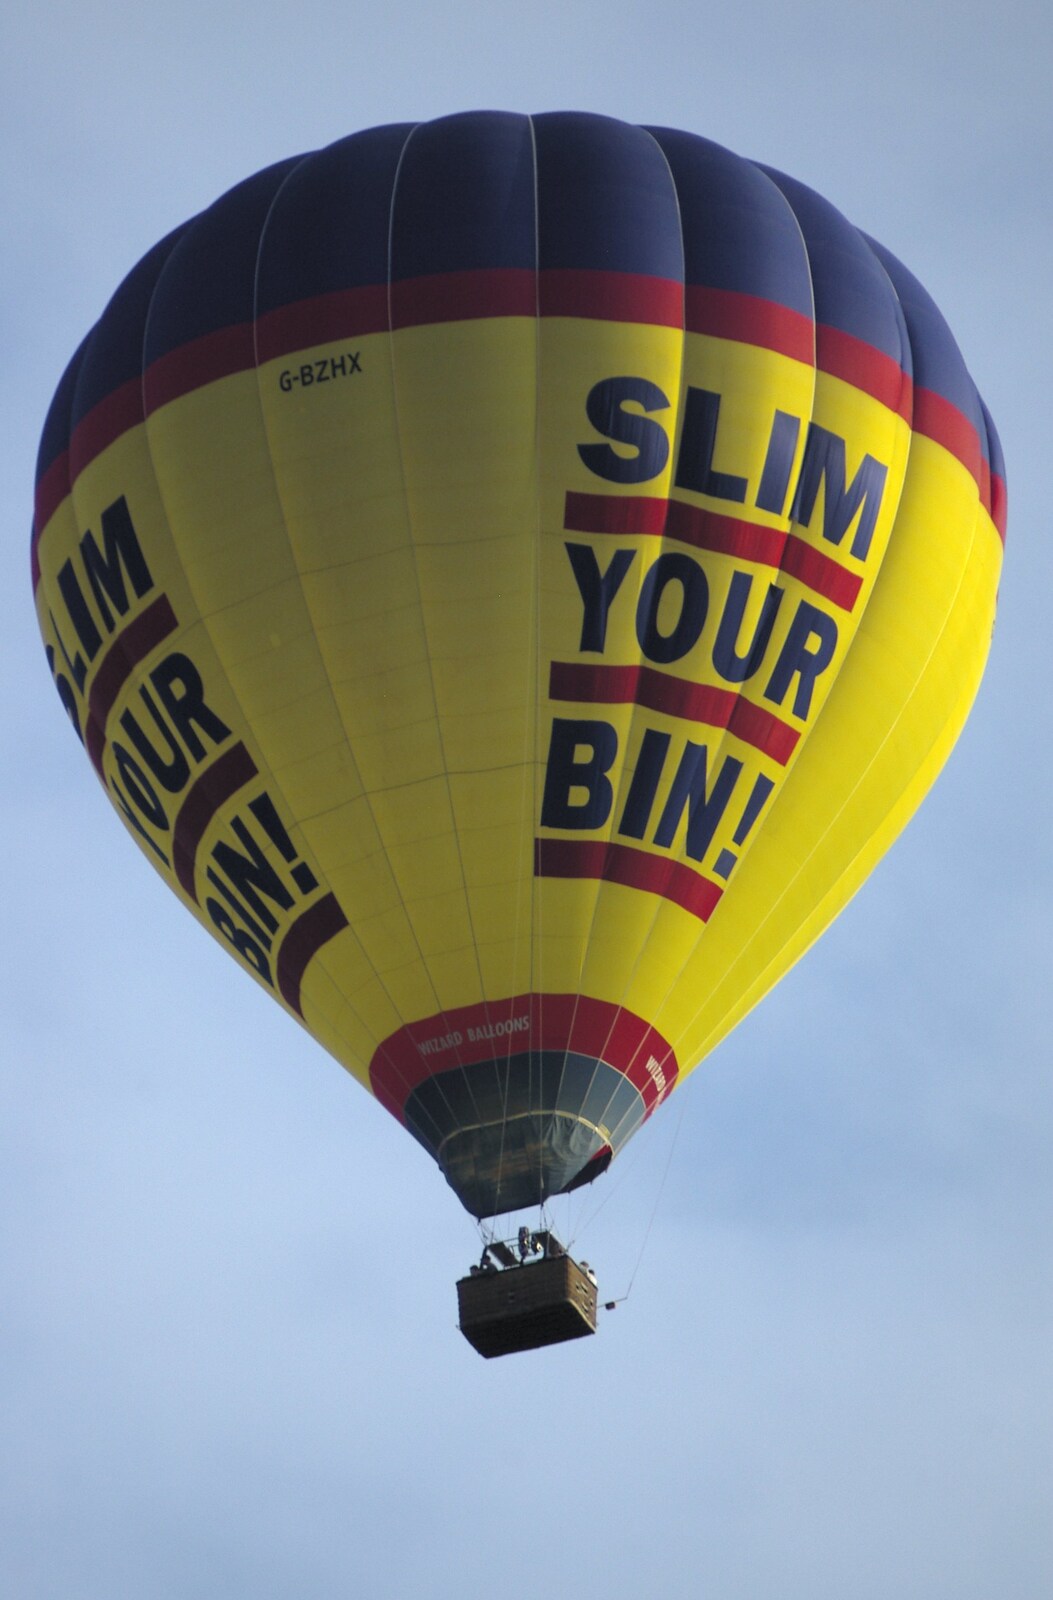 Back in Brome, the Slim Your Bin balloon goes up from Spiders, Norwich Science Festival and Kingston Arms Music - 5th September 2006